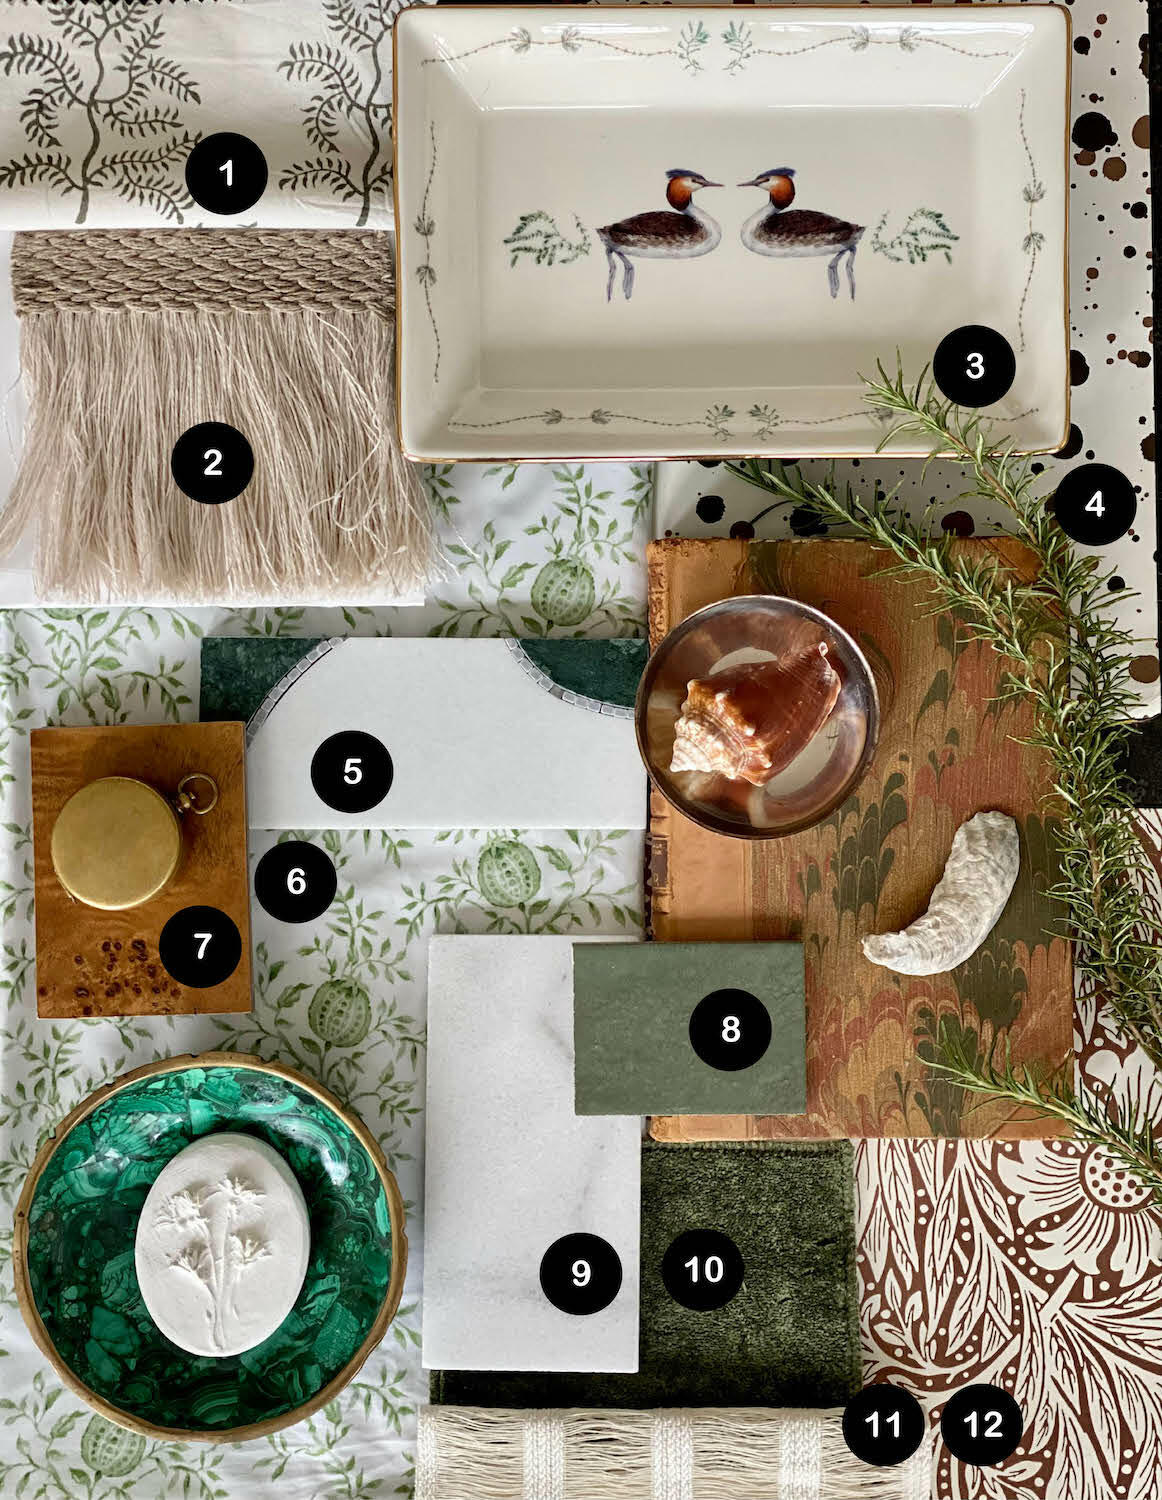 GordonDunning’s elevated assortment of hunter green tiles, braided linen fringes and burl wood finishes